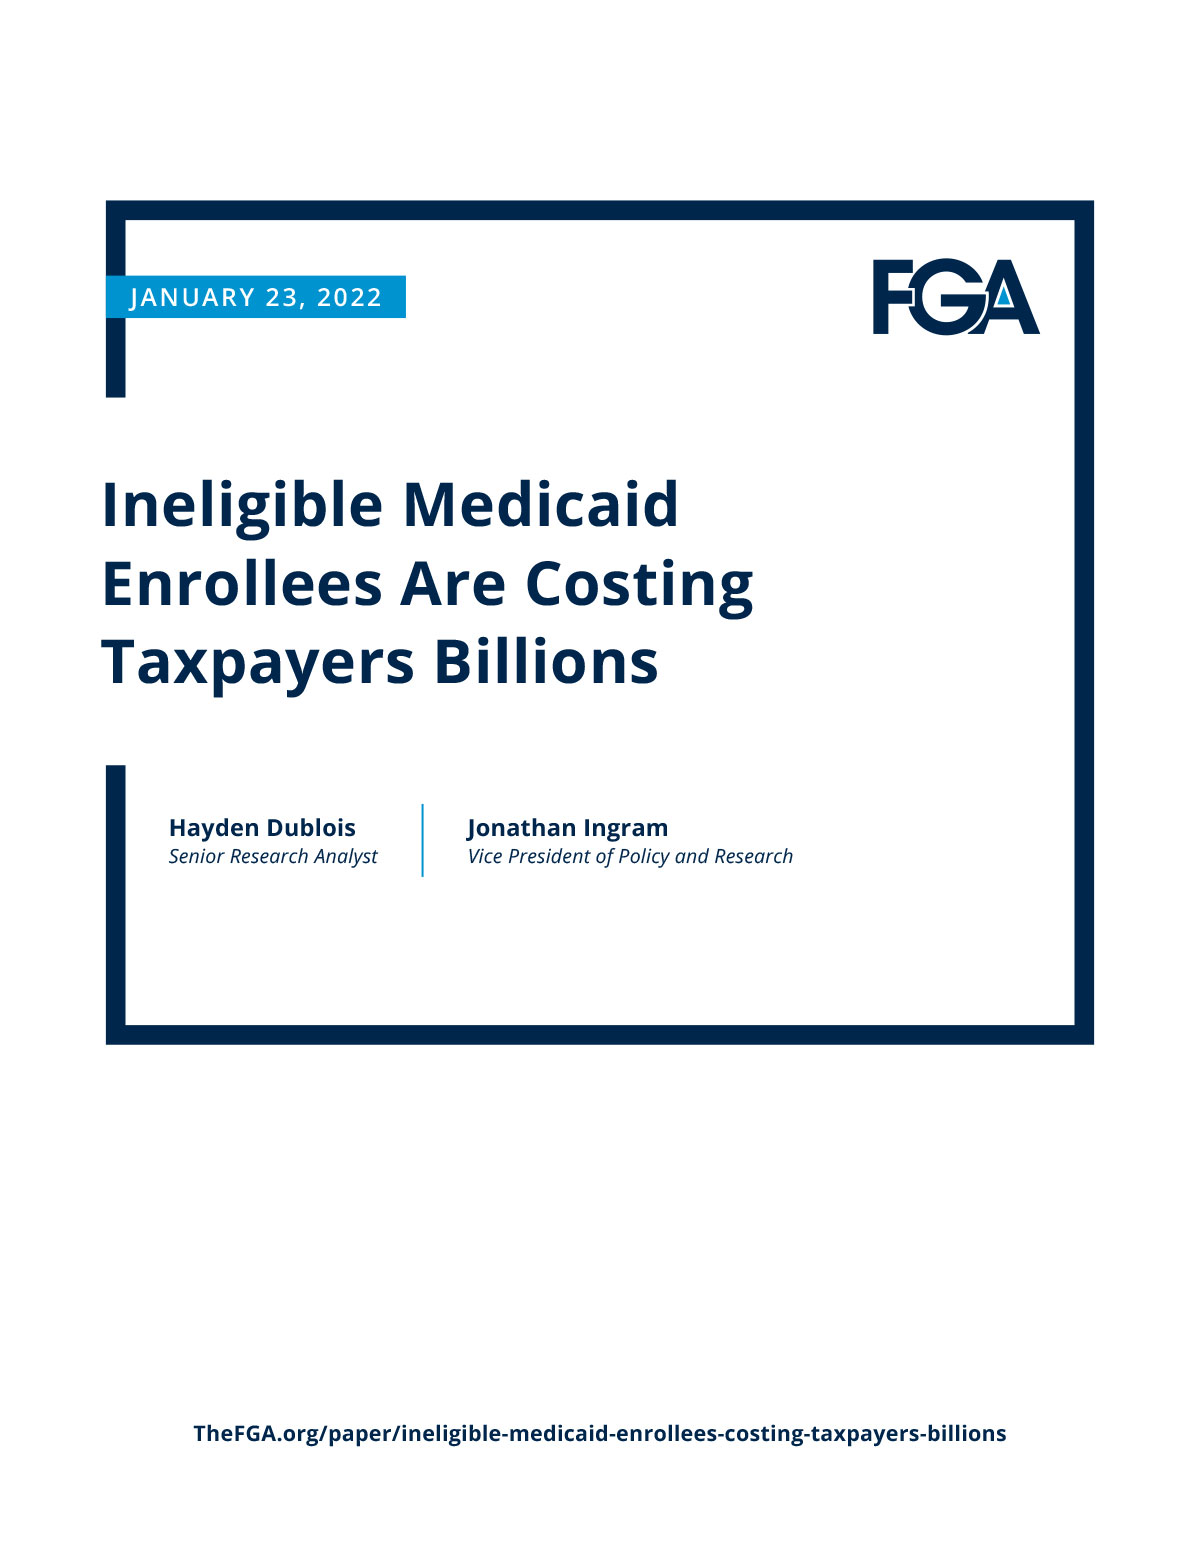 Ineligible Medicaid Enrollees Are Costing Taxpayers Billions